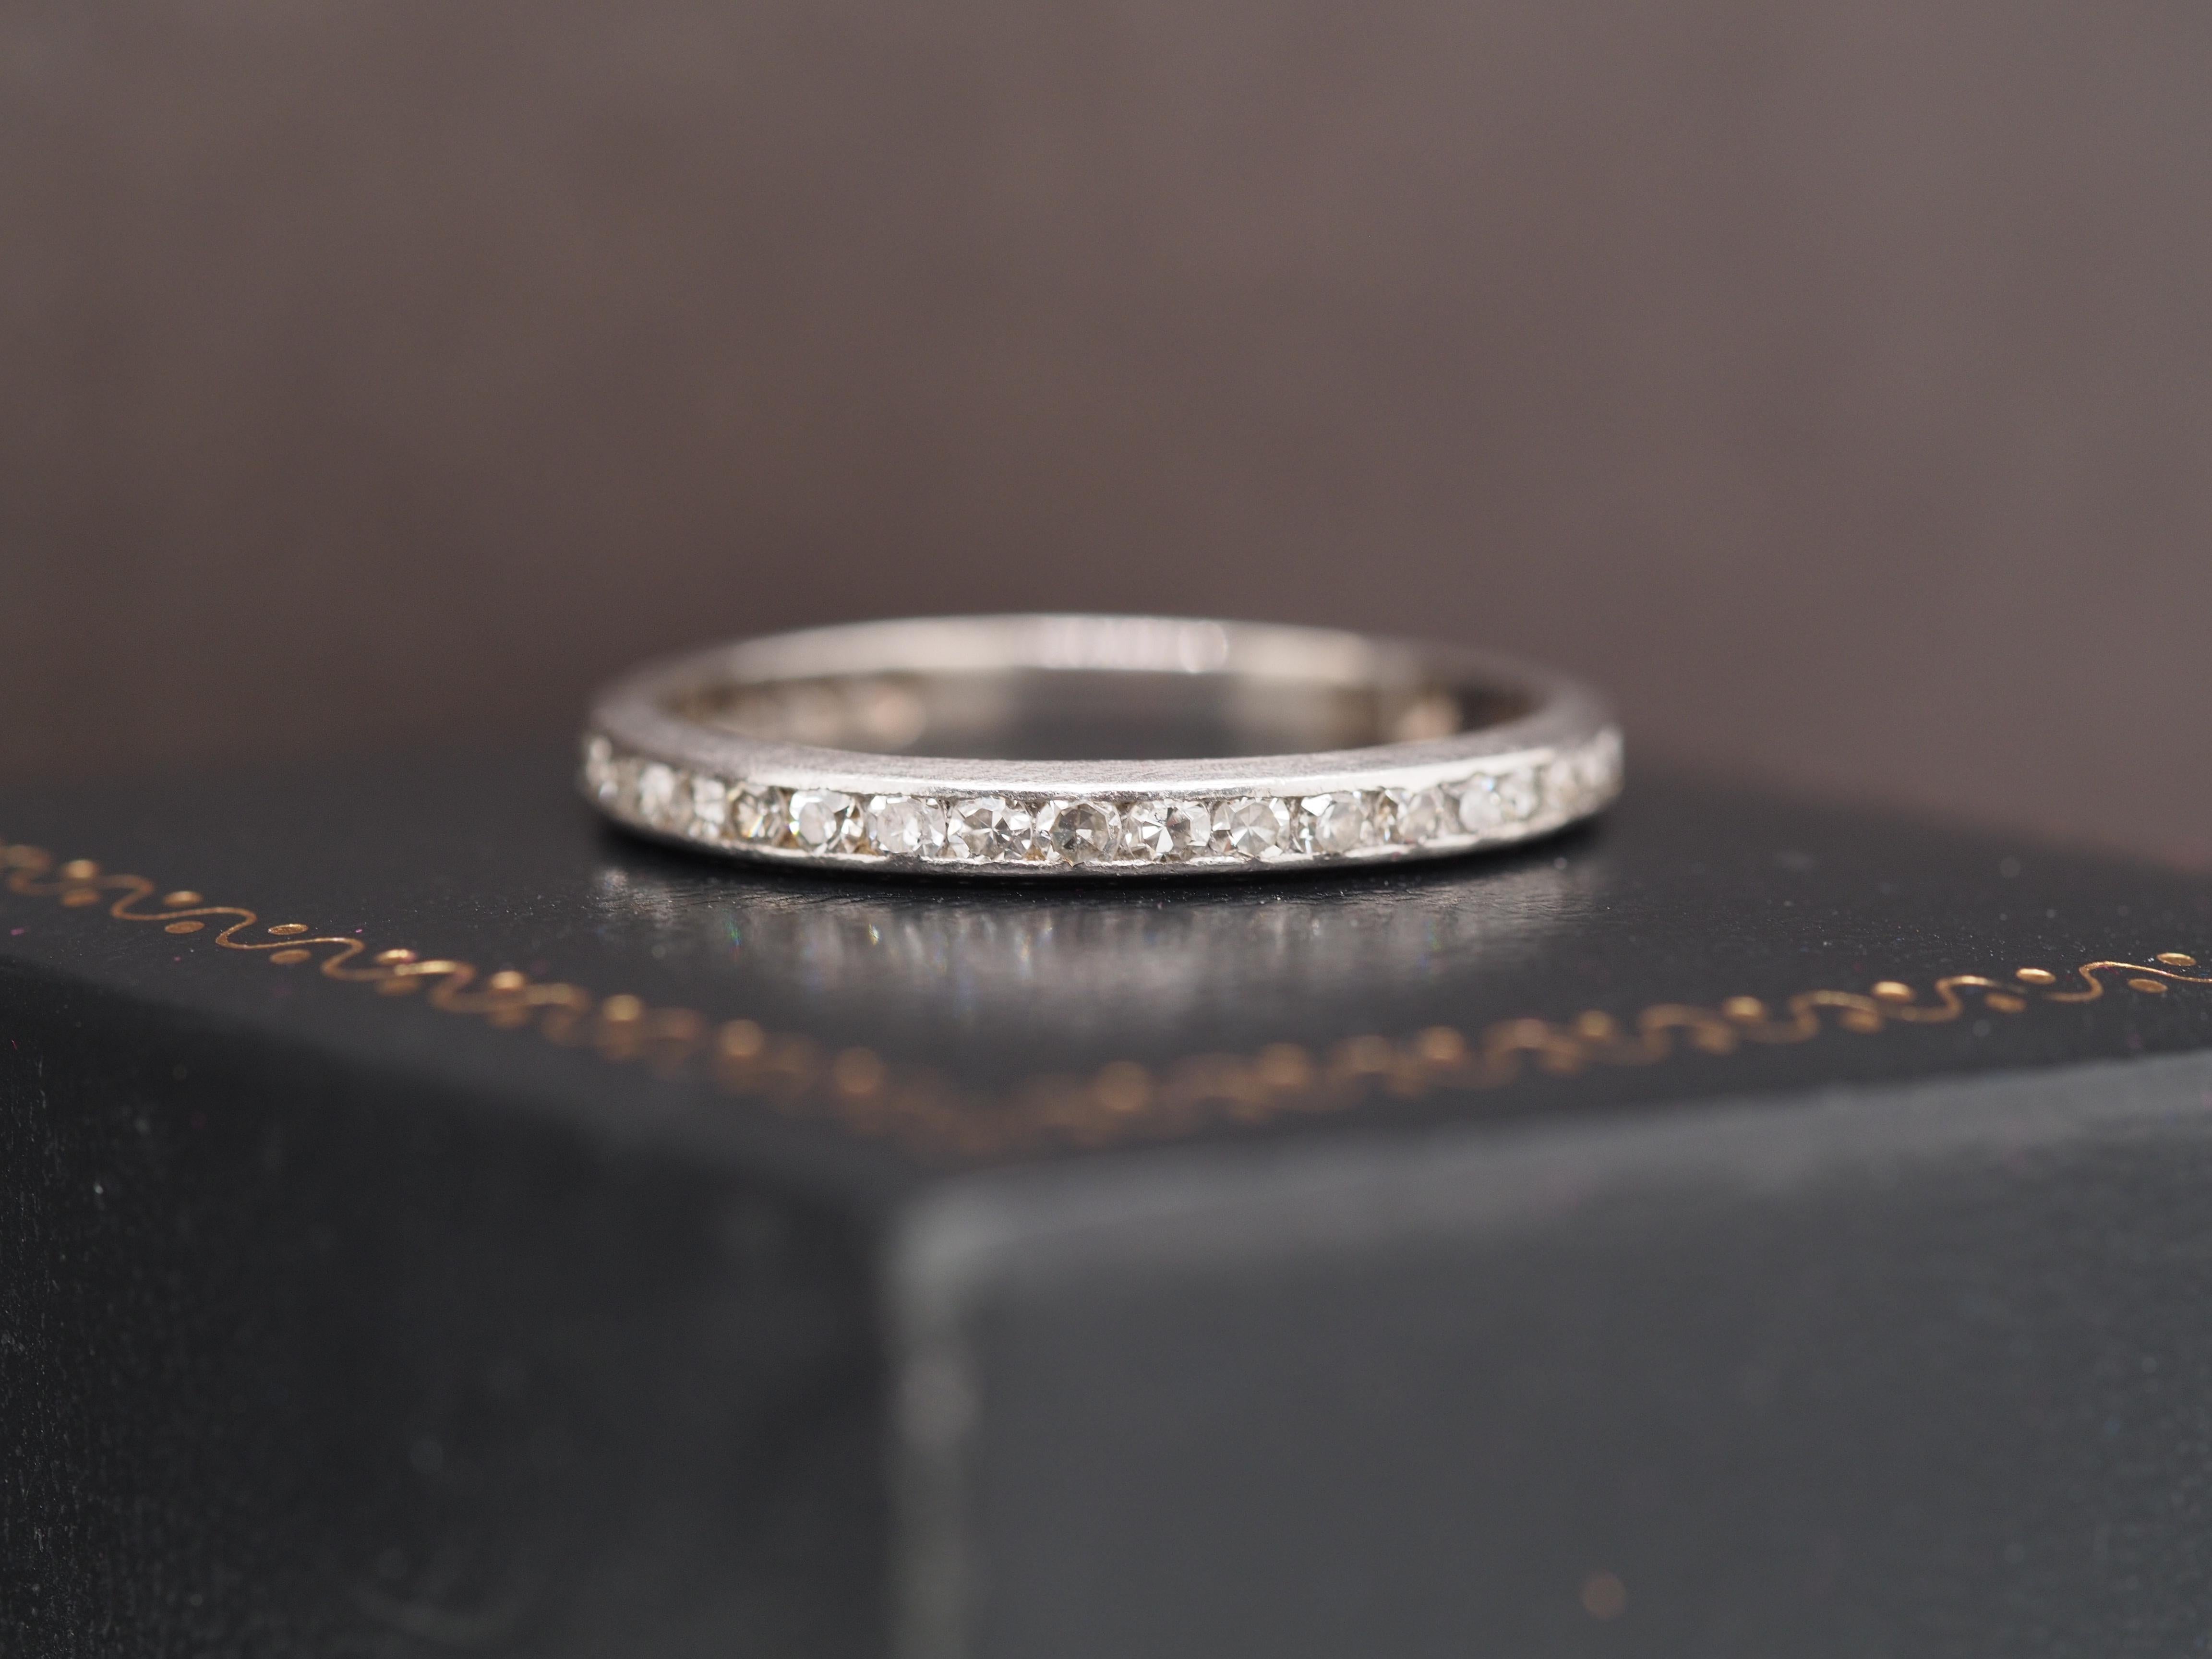 Year: 1920
Item Details:
Ring Size: 8.5
Metal Type: Platinum [Hallmarked, and Tested]
Weight: 2.9 grams
Diamond Details
Center Diamond: 1.00cttw
Cut: Antique Single Cut
Color: F-G
Clarity: VS
Band Width: 2.1 mm
Condition: Excellent